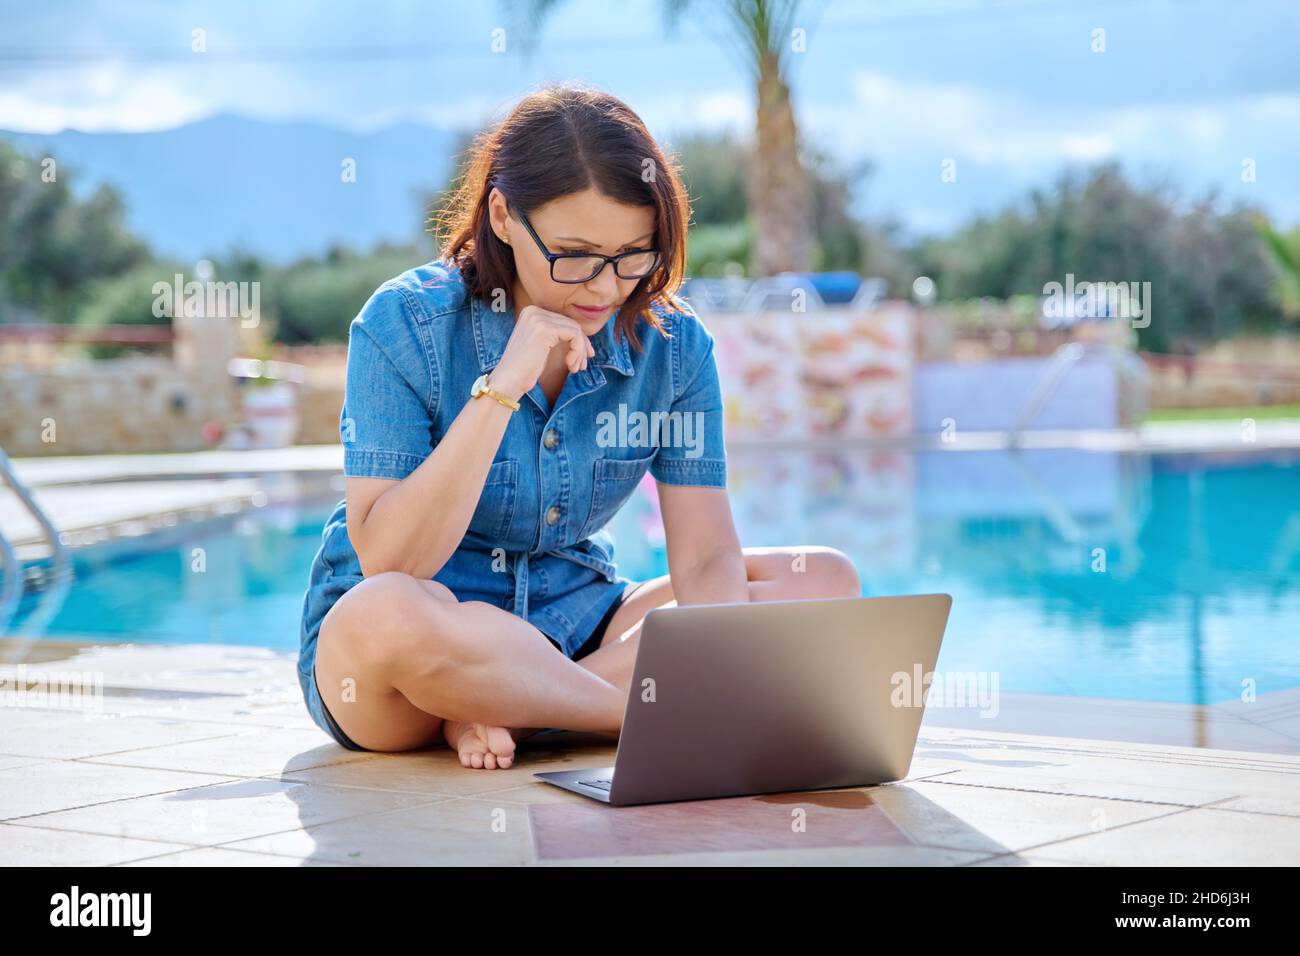 Middle-aged woman relaxing near the pool using a laptop. Stock Photo